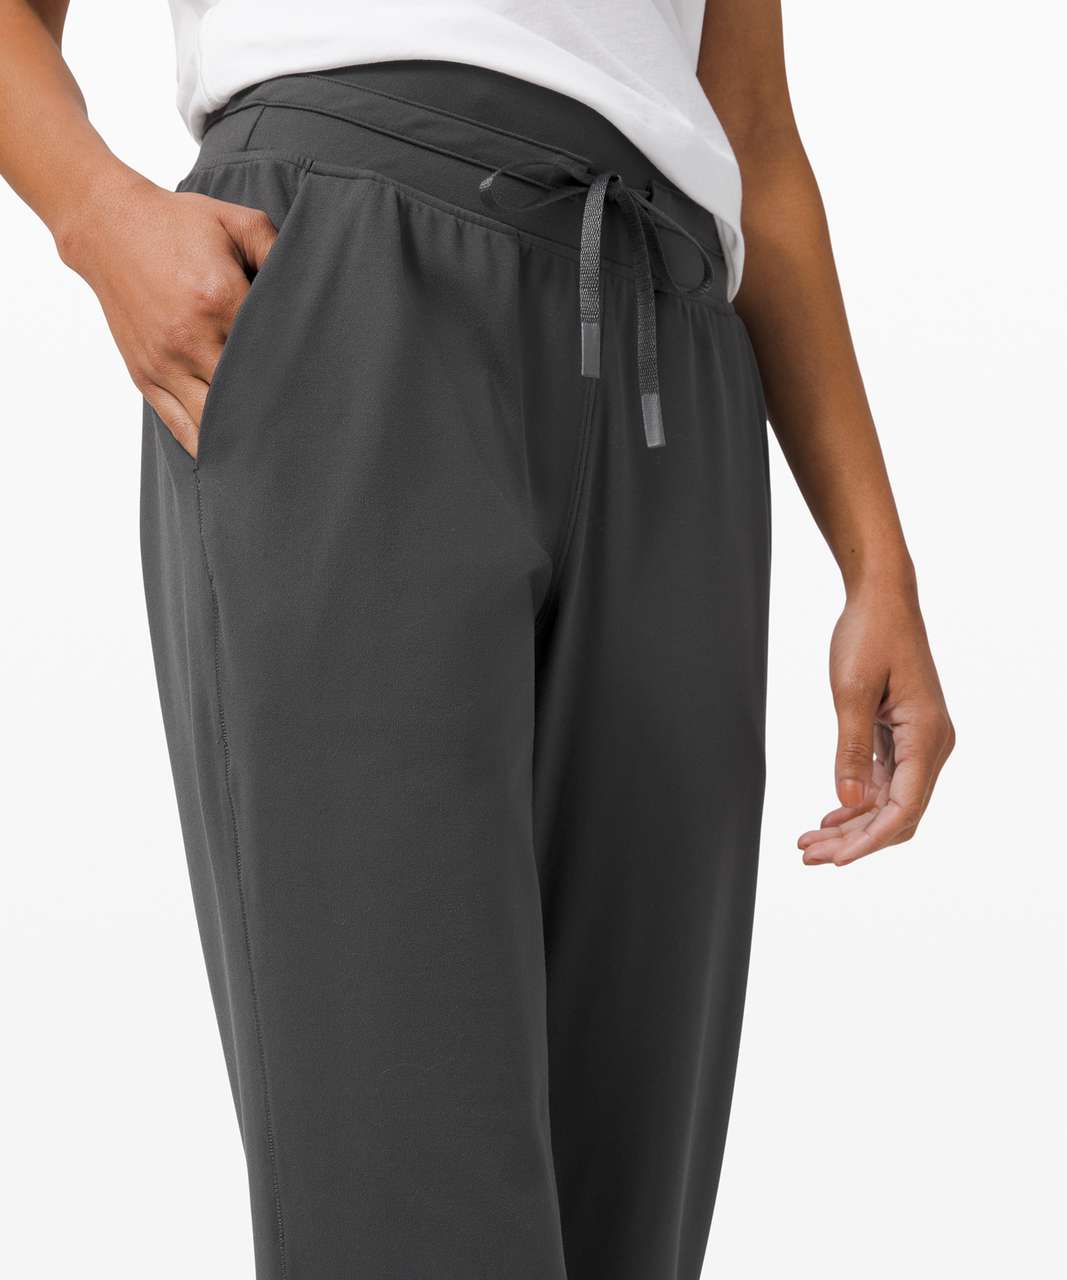 Lululemon Ready to Rulu Joggers Graphite Grey NWT - Athletic apparel